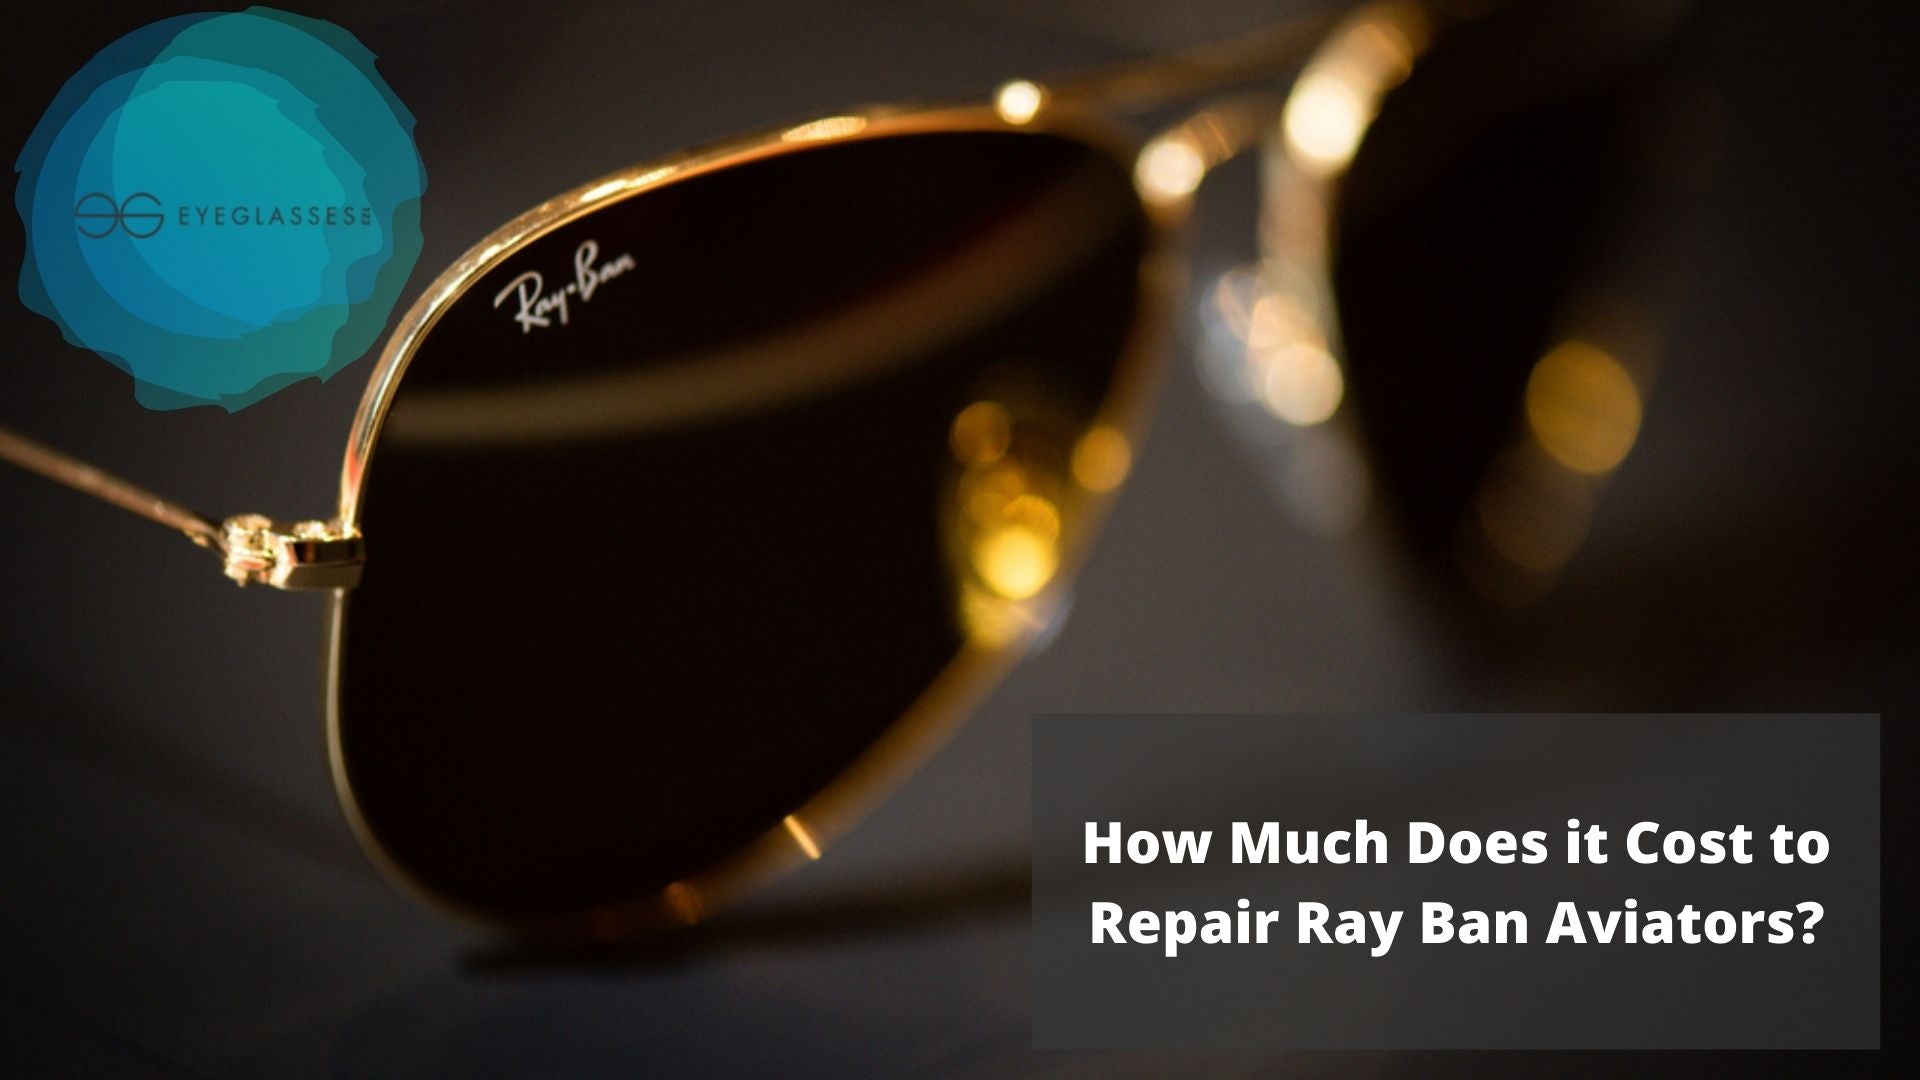 How Much Does it Cost to Repair Ray Ban Aviators?